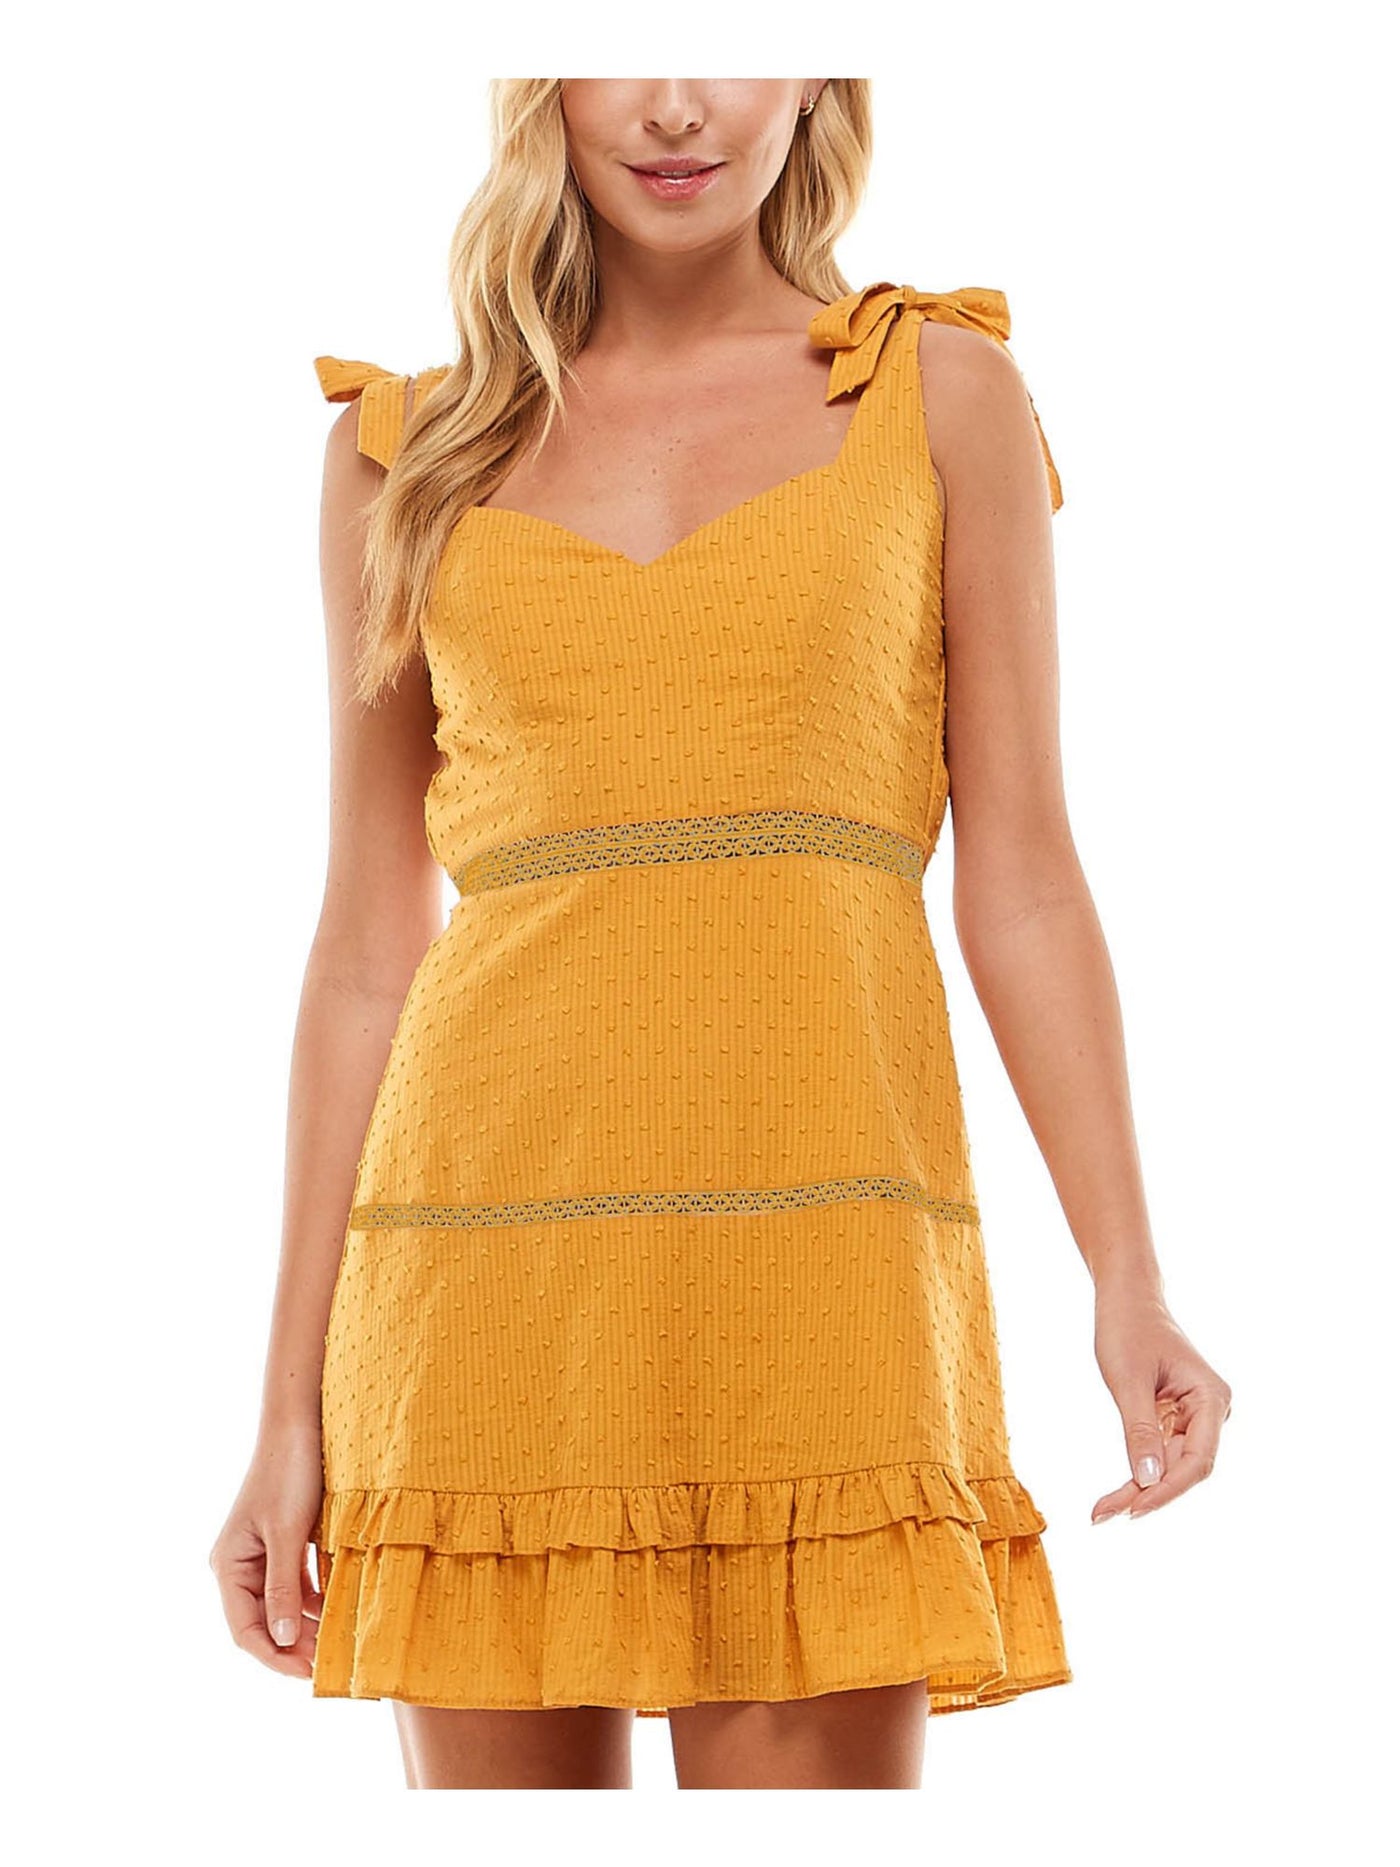 CITY STUDIO Womens Yellow Textured Ruffled Lace Insets Tie At Shoulder Sleeveless Sweetheart Neckline Mini Fit + Flare Dress Juniors XL